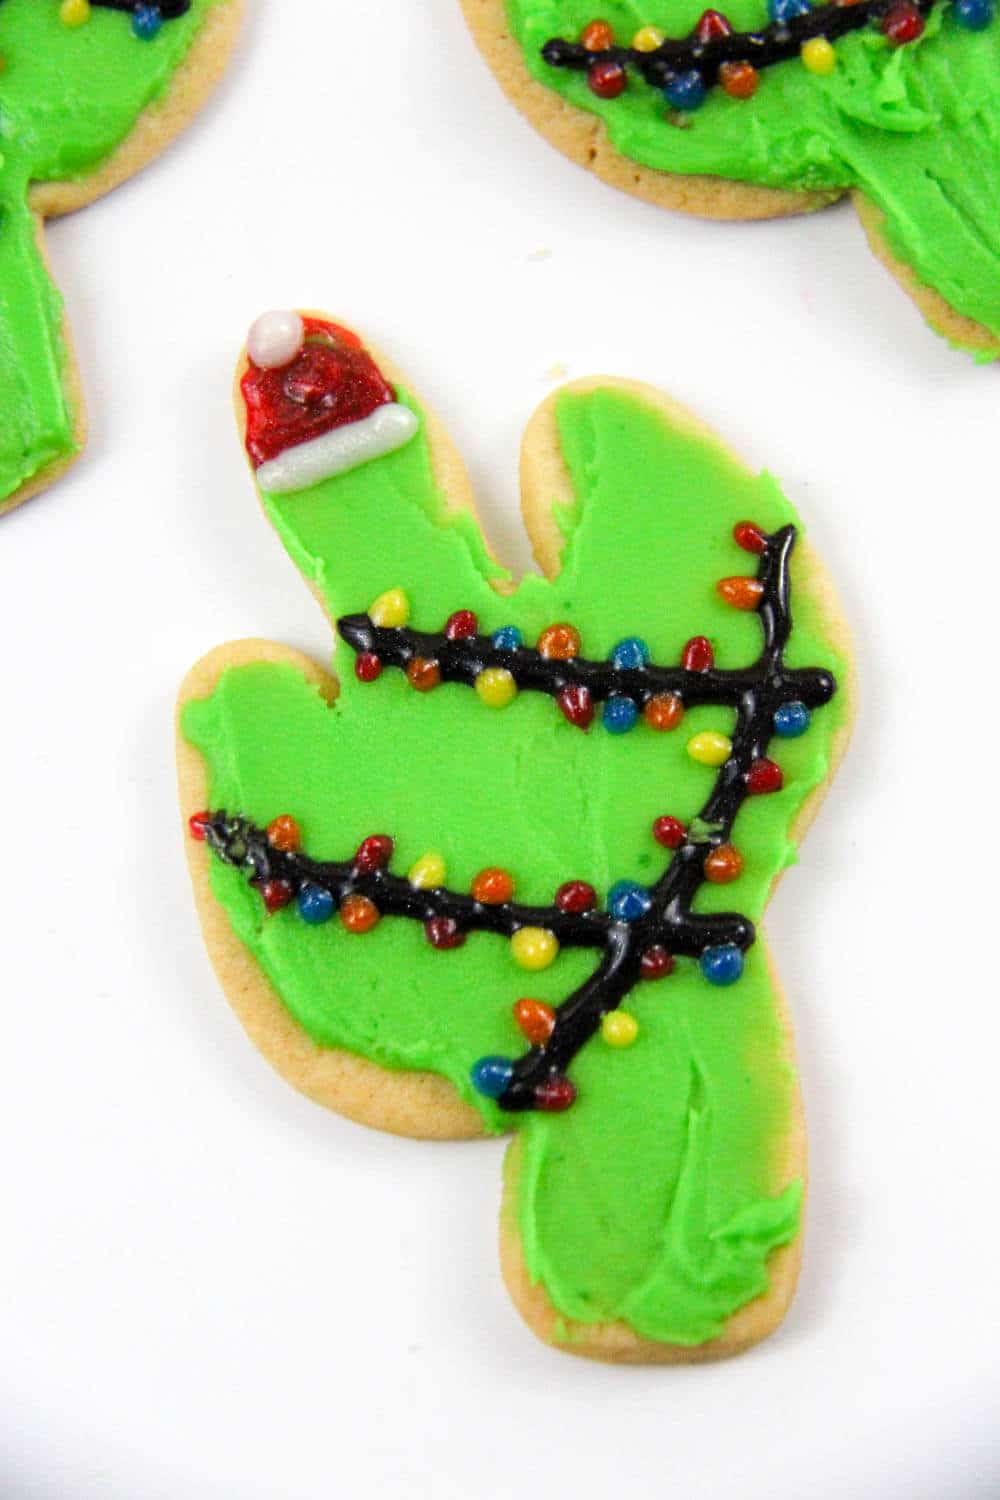 Christmas Cactus Cookies | Cactus Cookie Cutter | Christmas tree cookies | Christmas cookie exchange | www.madewithhappy.com